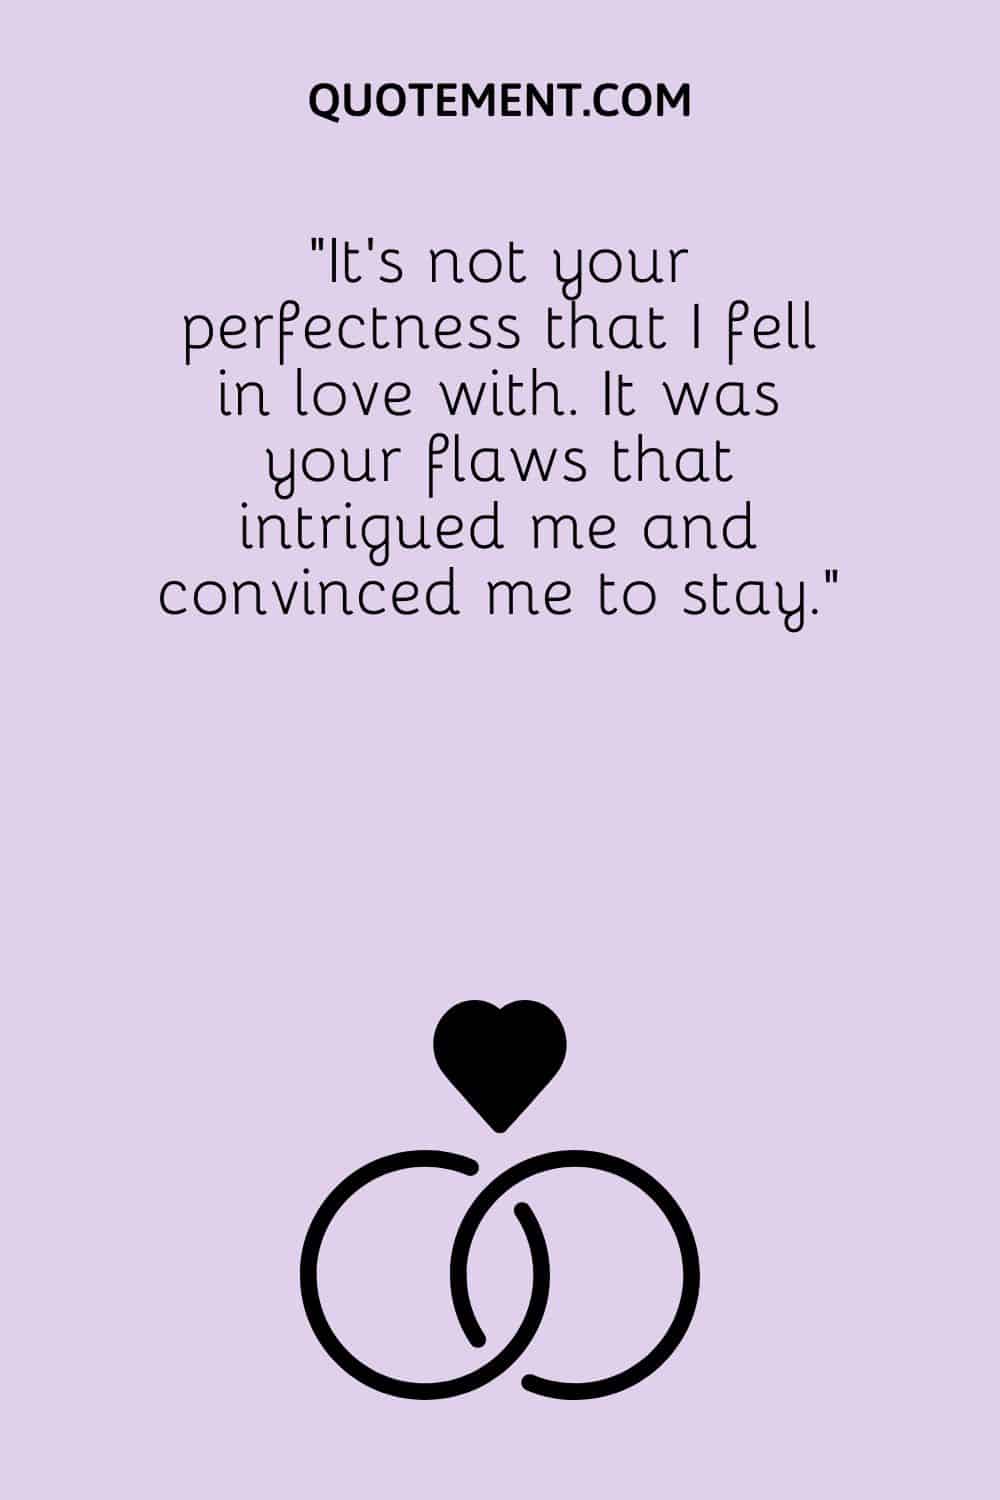 It’s not your perfectness that I fell in love with.